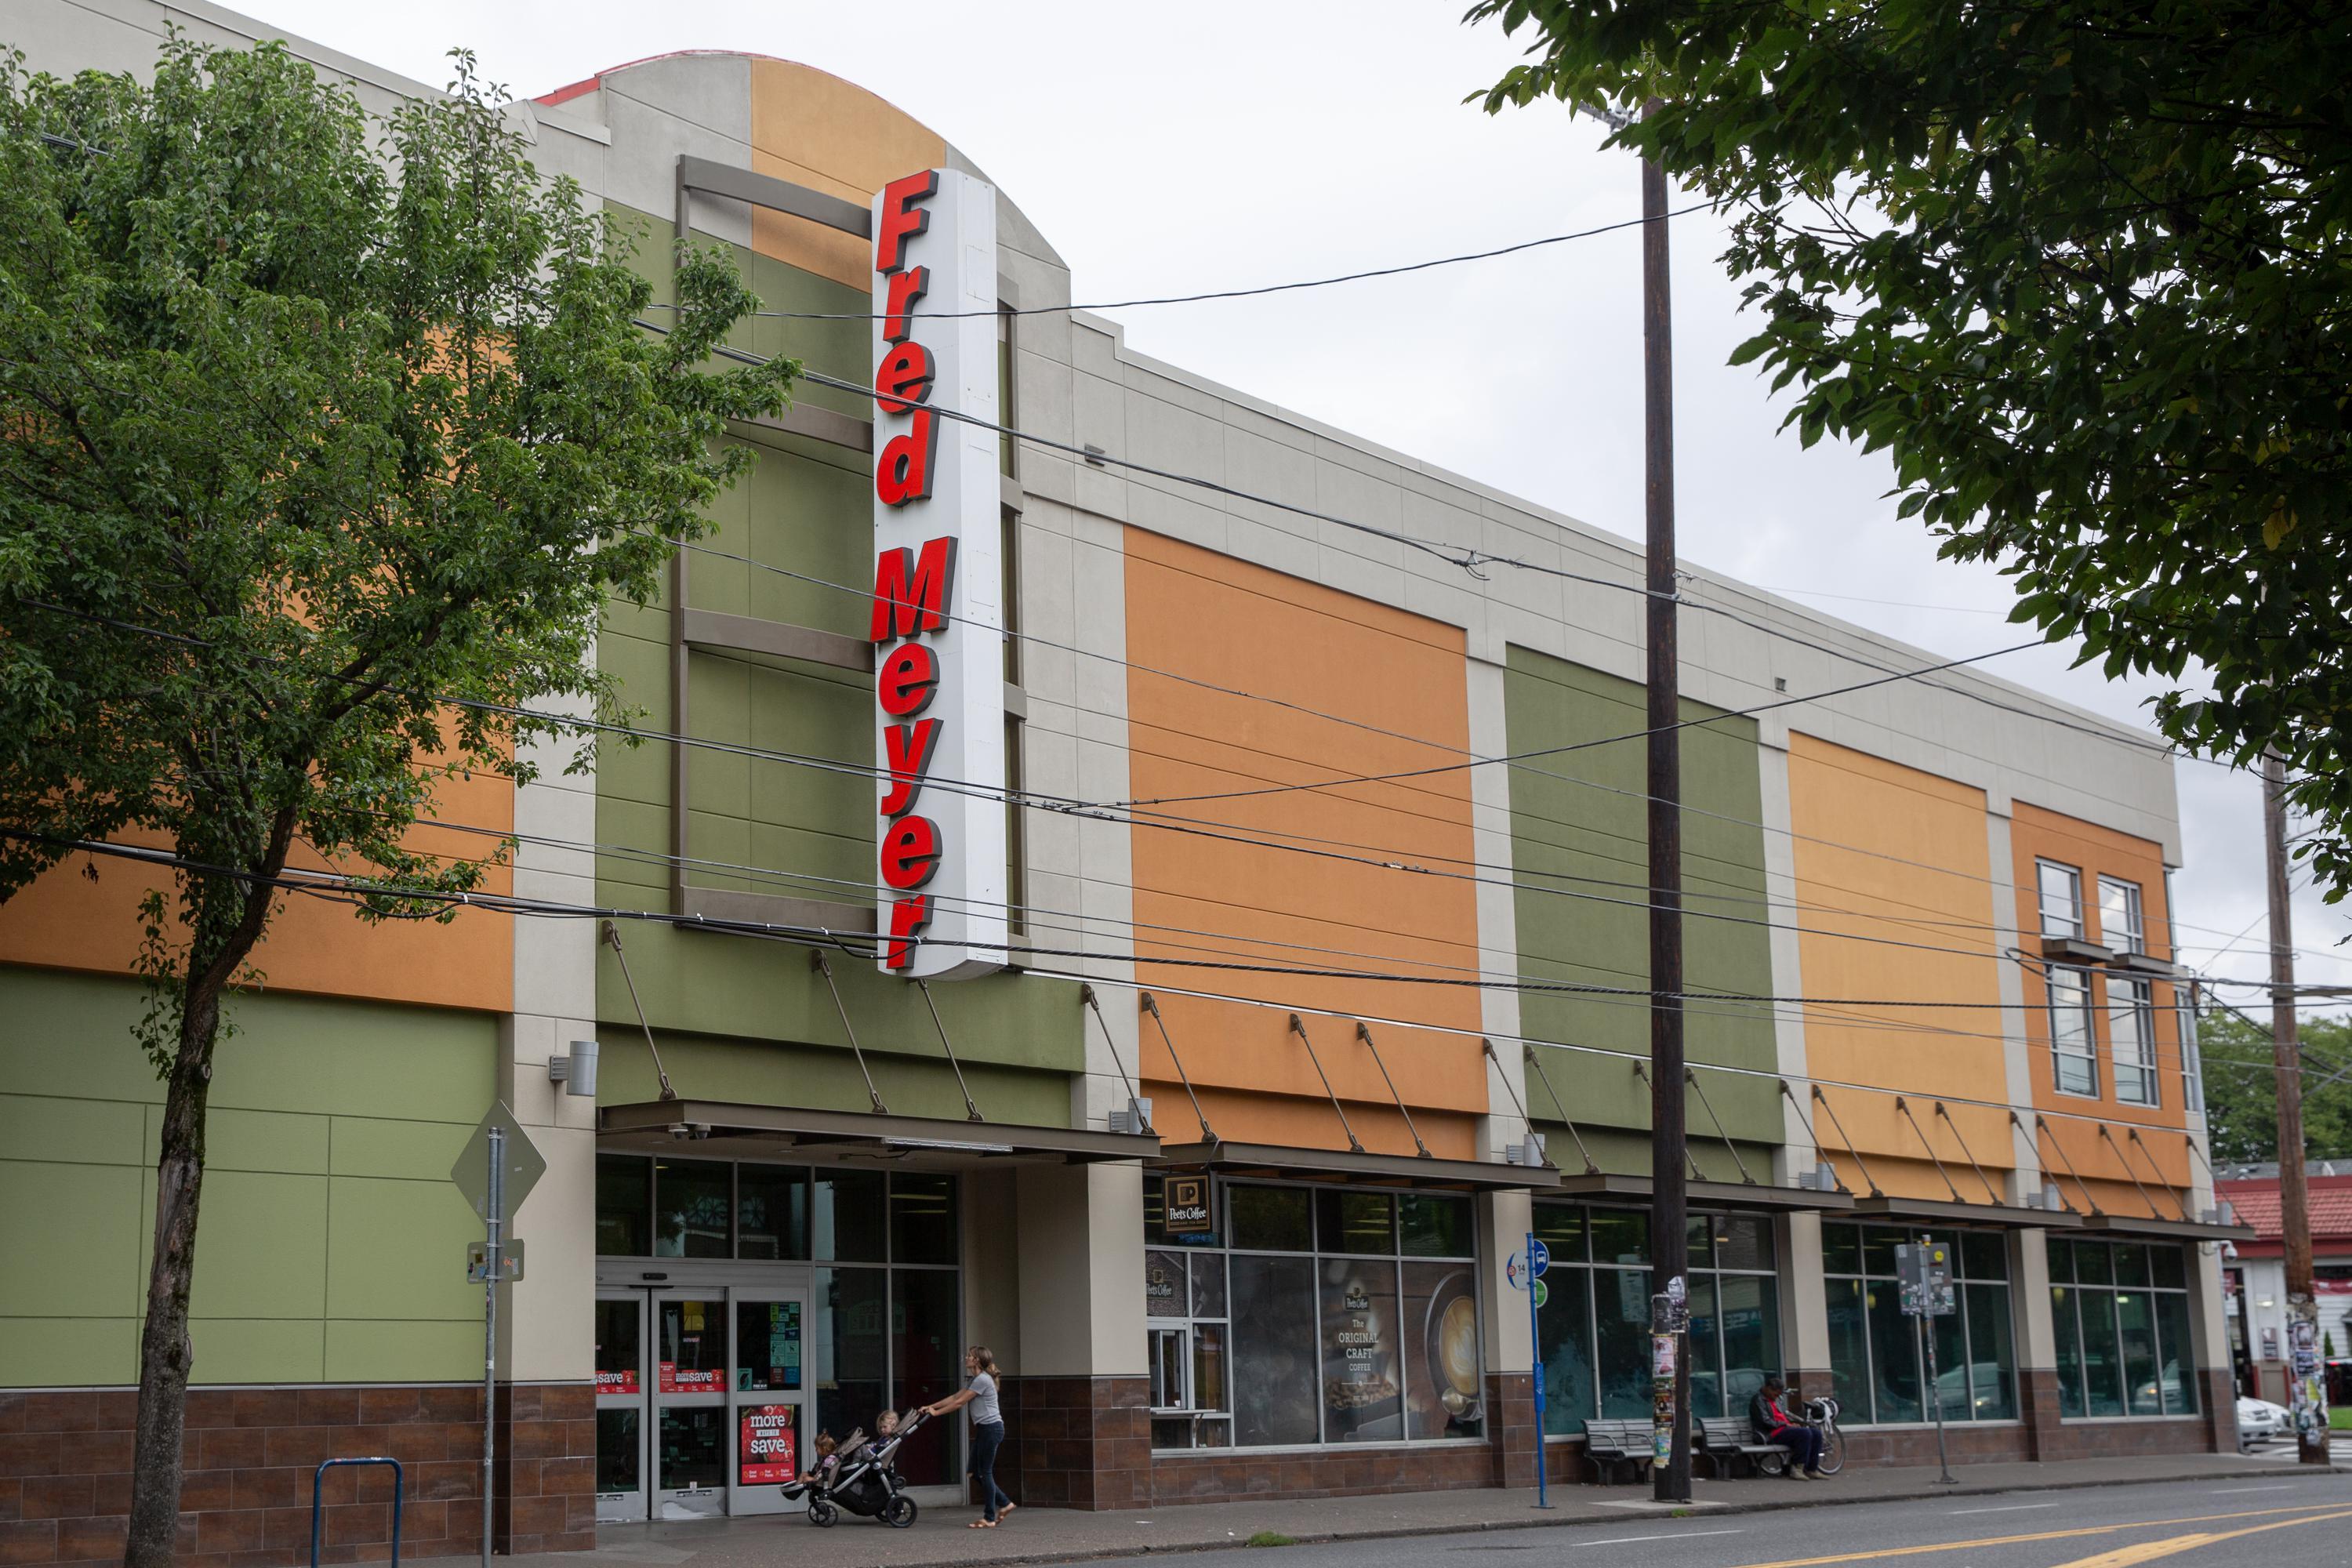 Fred Meyer Warehouse Workers Have Unanimously Voted to Authorize a